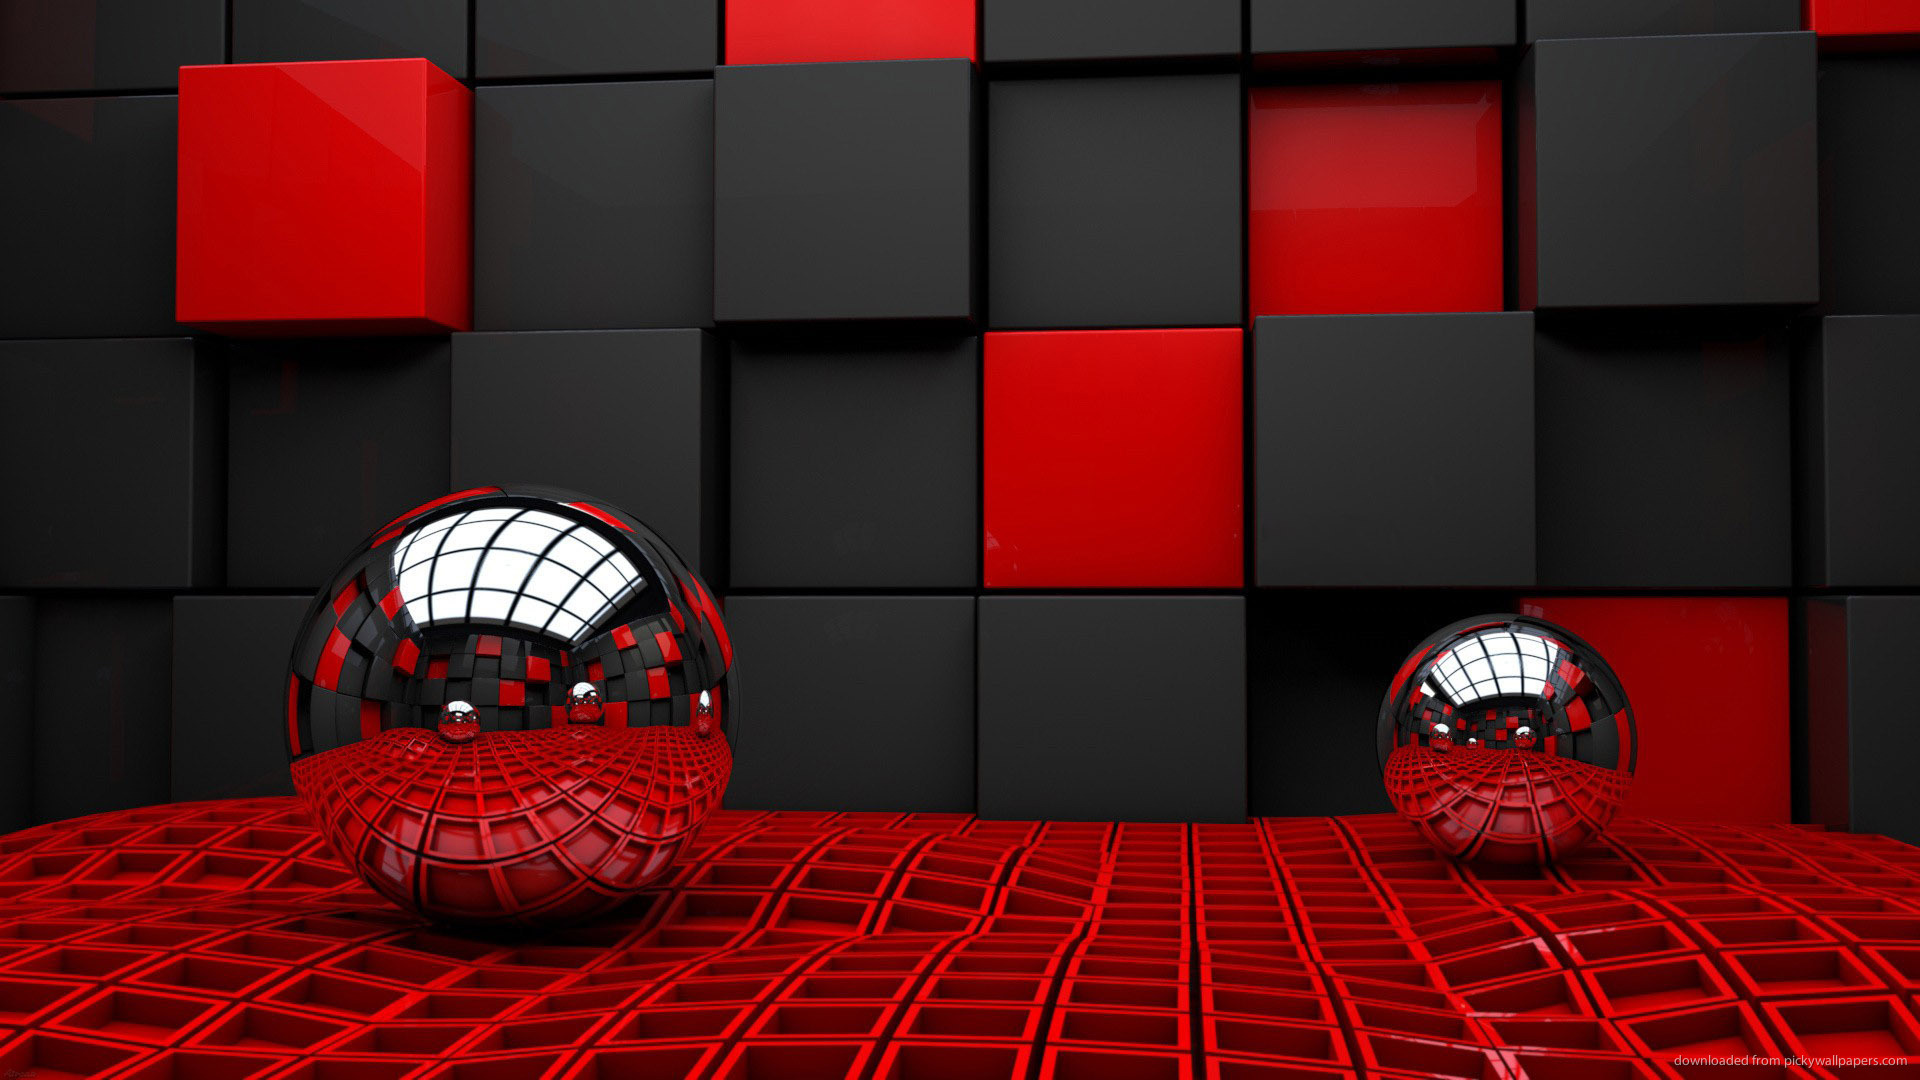 Wallpaper Pickywallpaper Metal Spheres On A Rubber